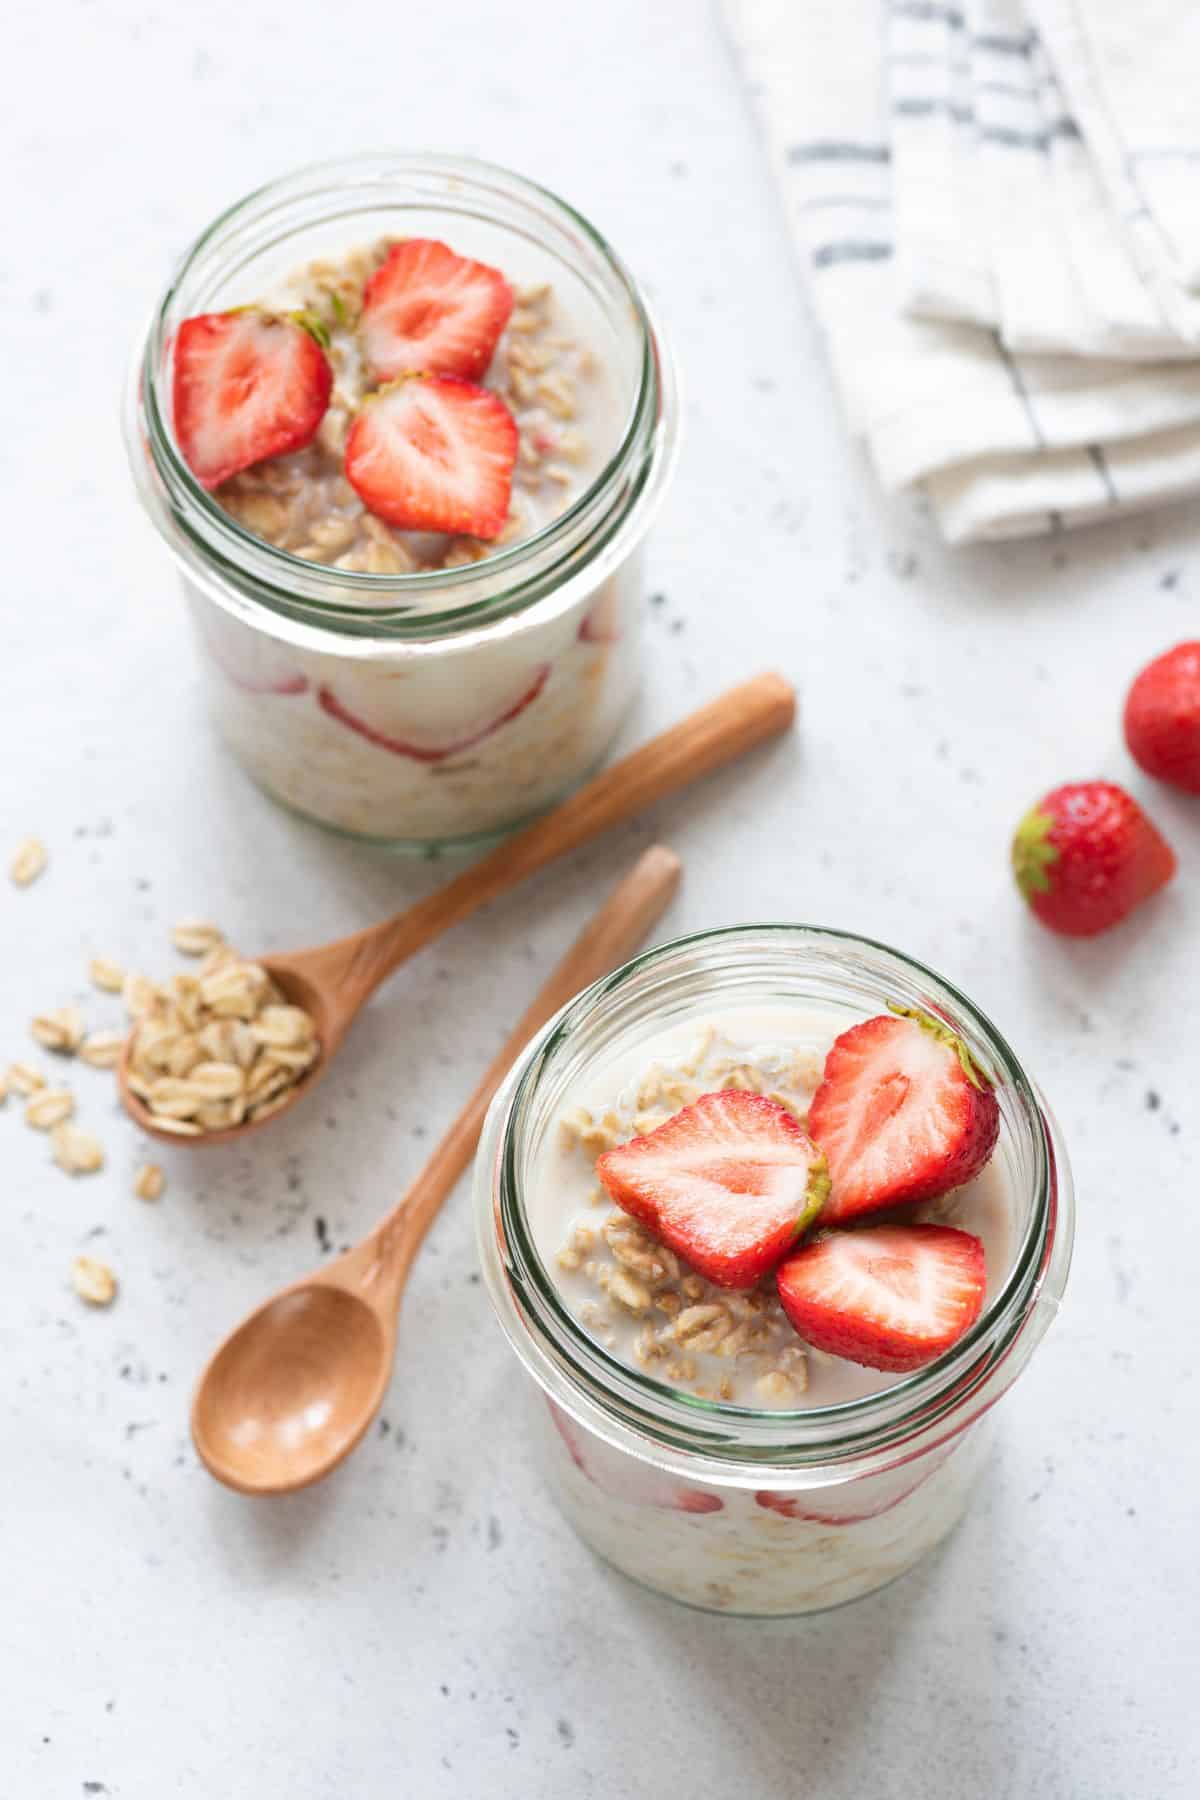 two small jars full of oatmeal topped with strawberries.